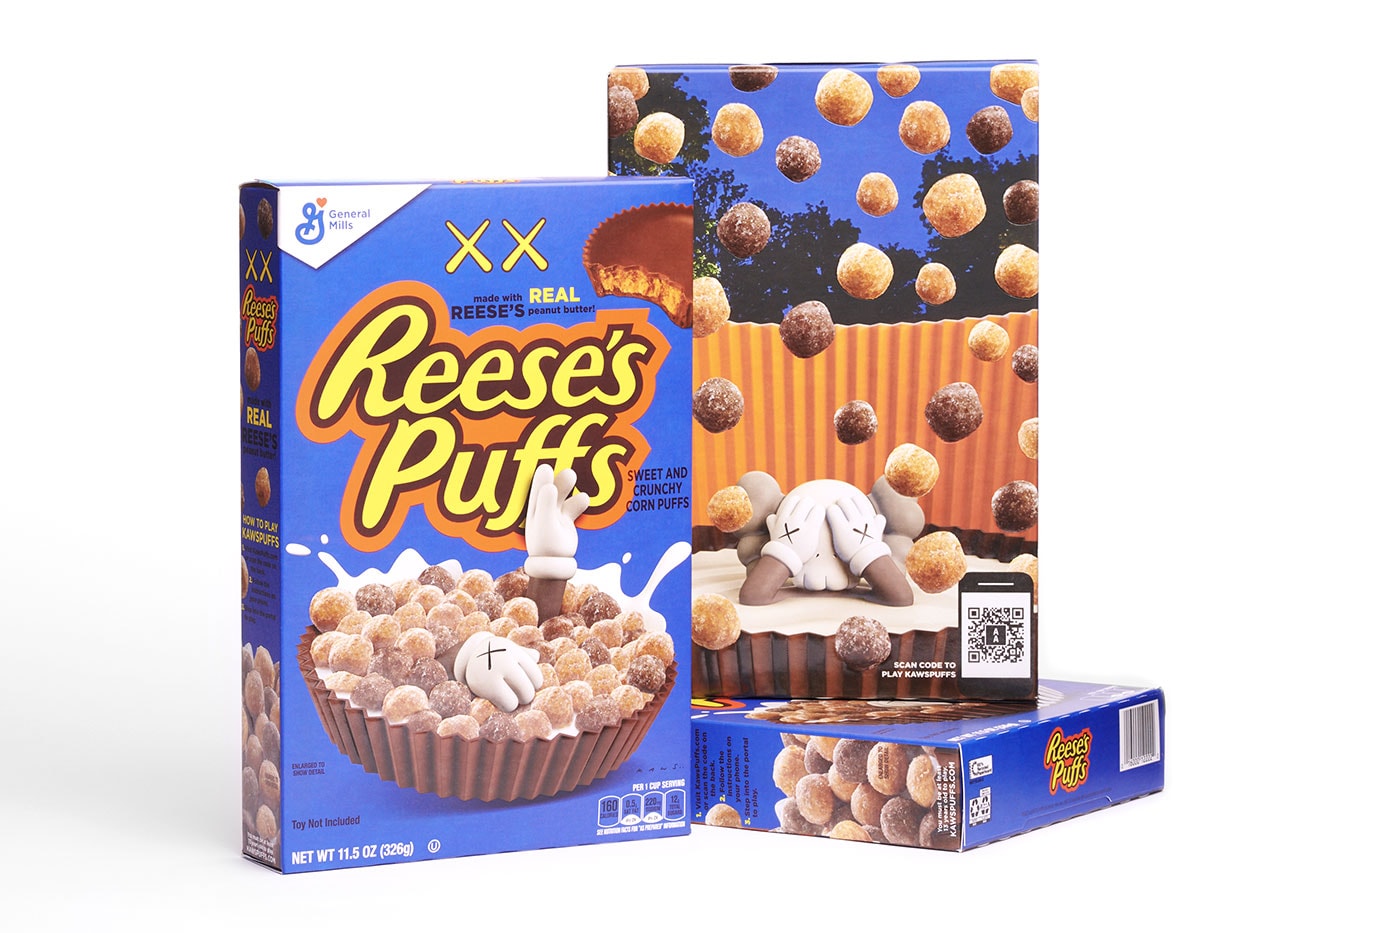 Reeses Puff's Officially Teams up With KAWS to Launch Two Cereal Boxes and AR Game Reese's Puff x KAWS Cereal Launch Release Info general mills cereal kaws companion kawspuffs